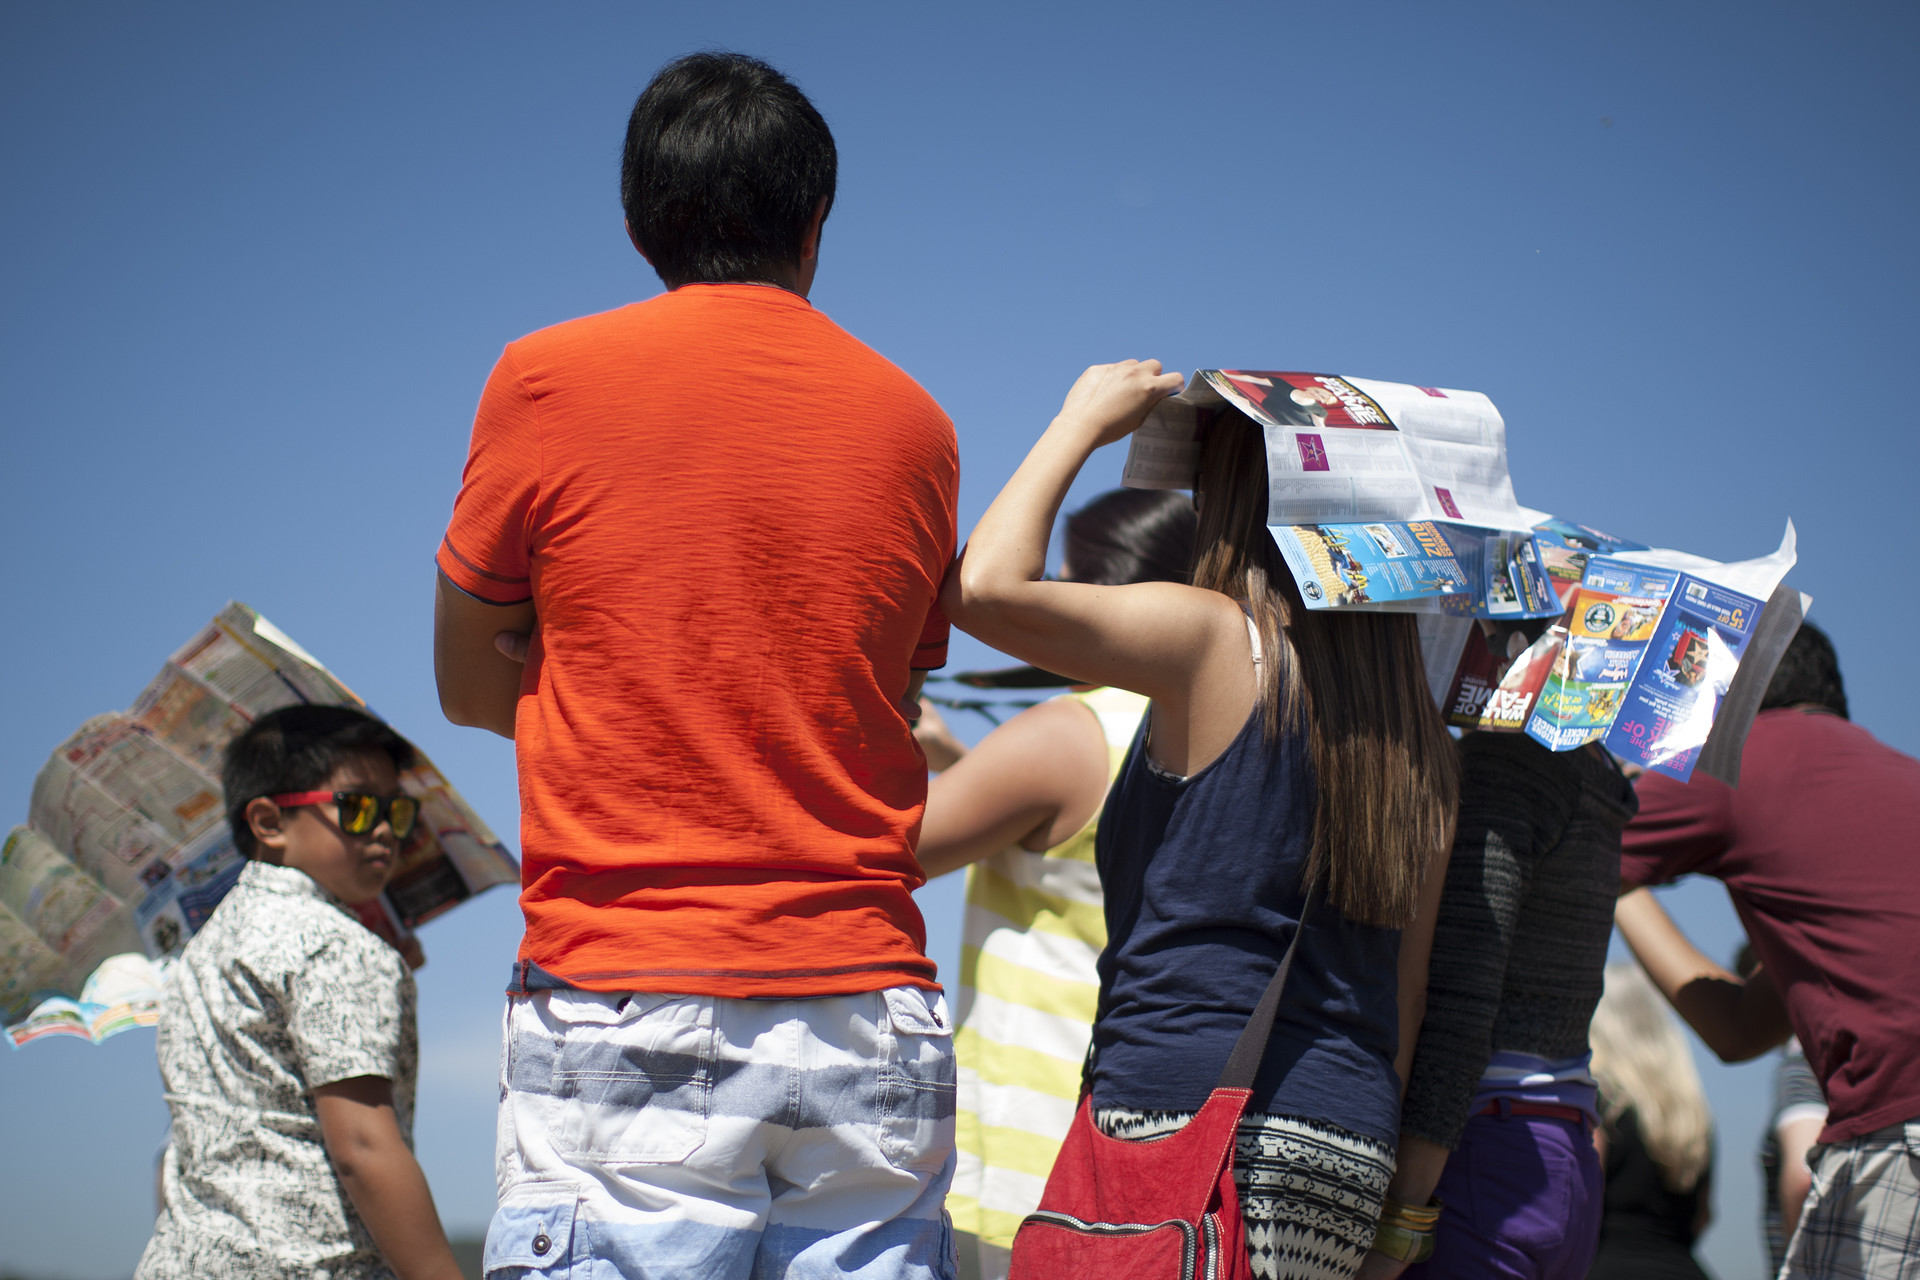 People hold Hollywood tourist maps over their heads as makeshift sunshade in Griffith Park in March 2015 in Los Angeles, California. A record-breaking series of unusual heat waves made this the first March to have had six days with highs in the 90s or above in Los Angeles since at least 1877 when record-keeping began.